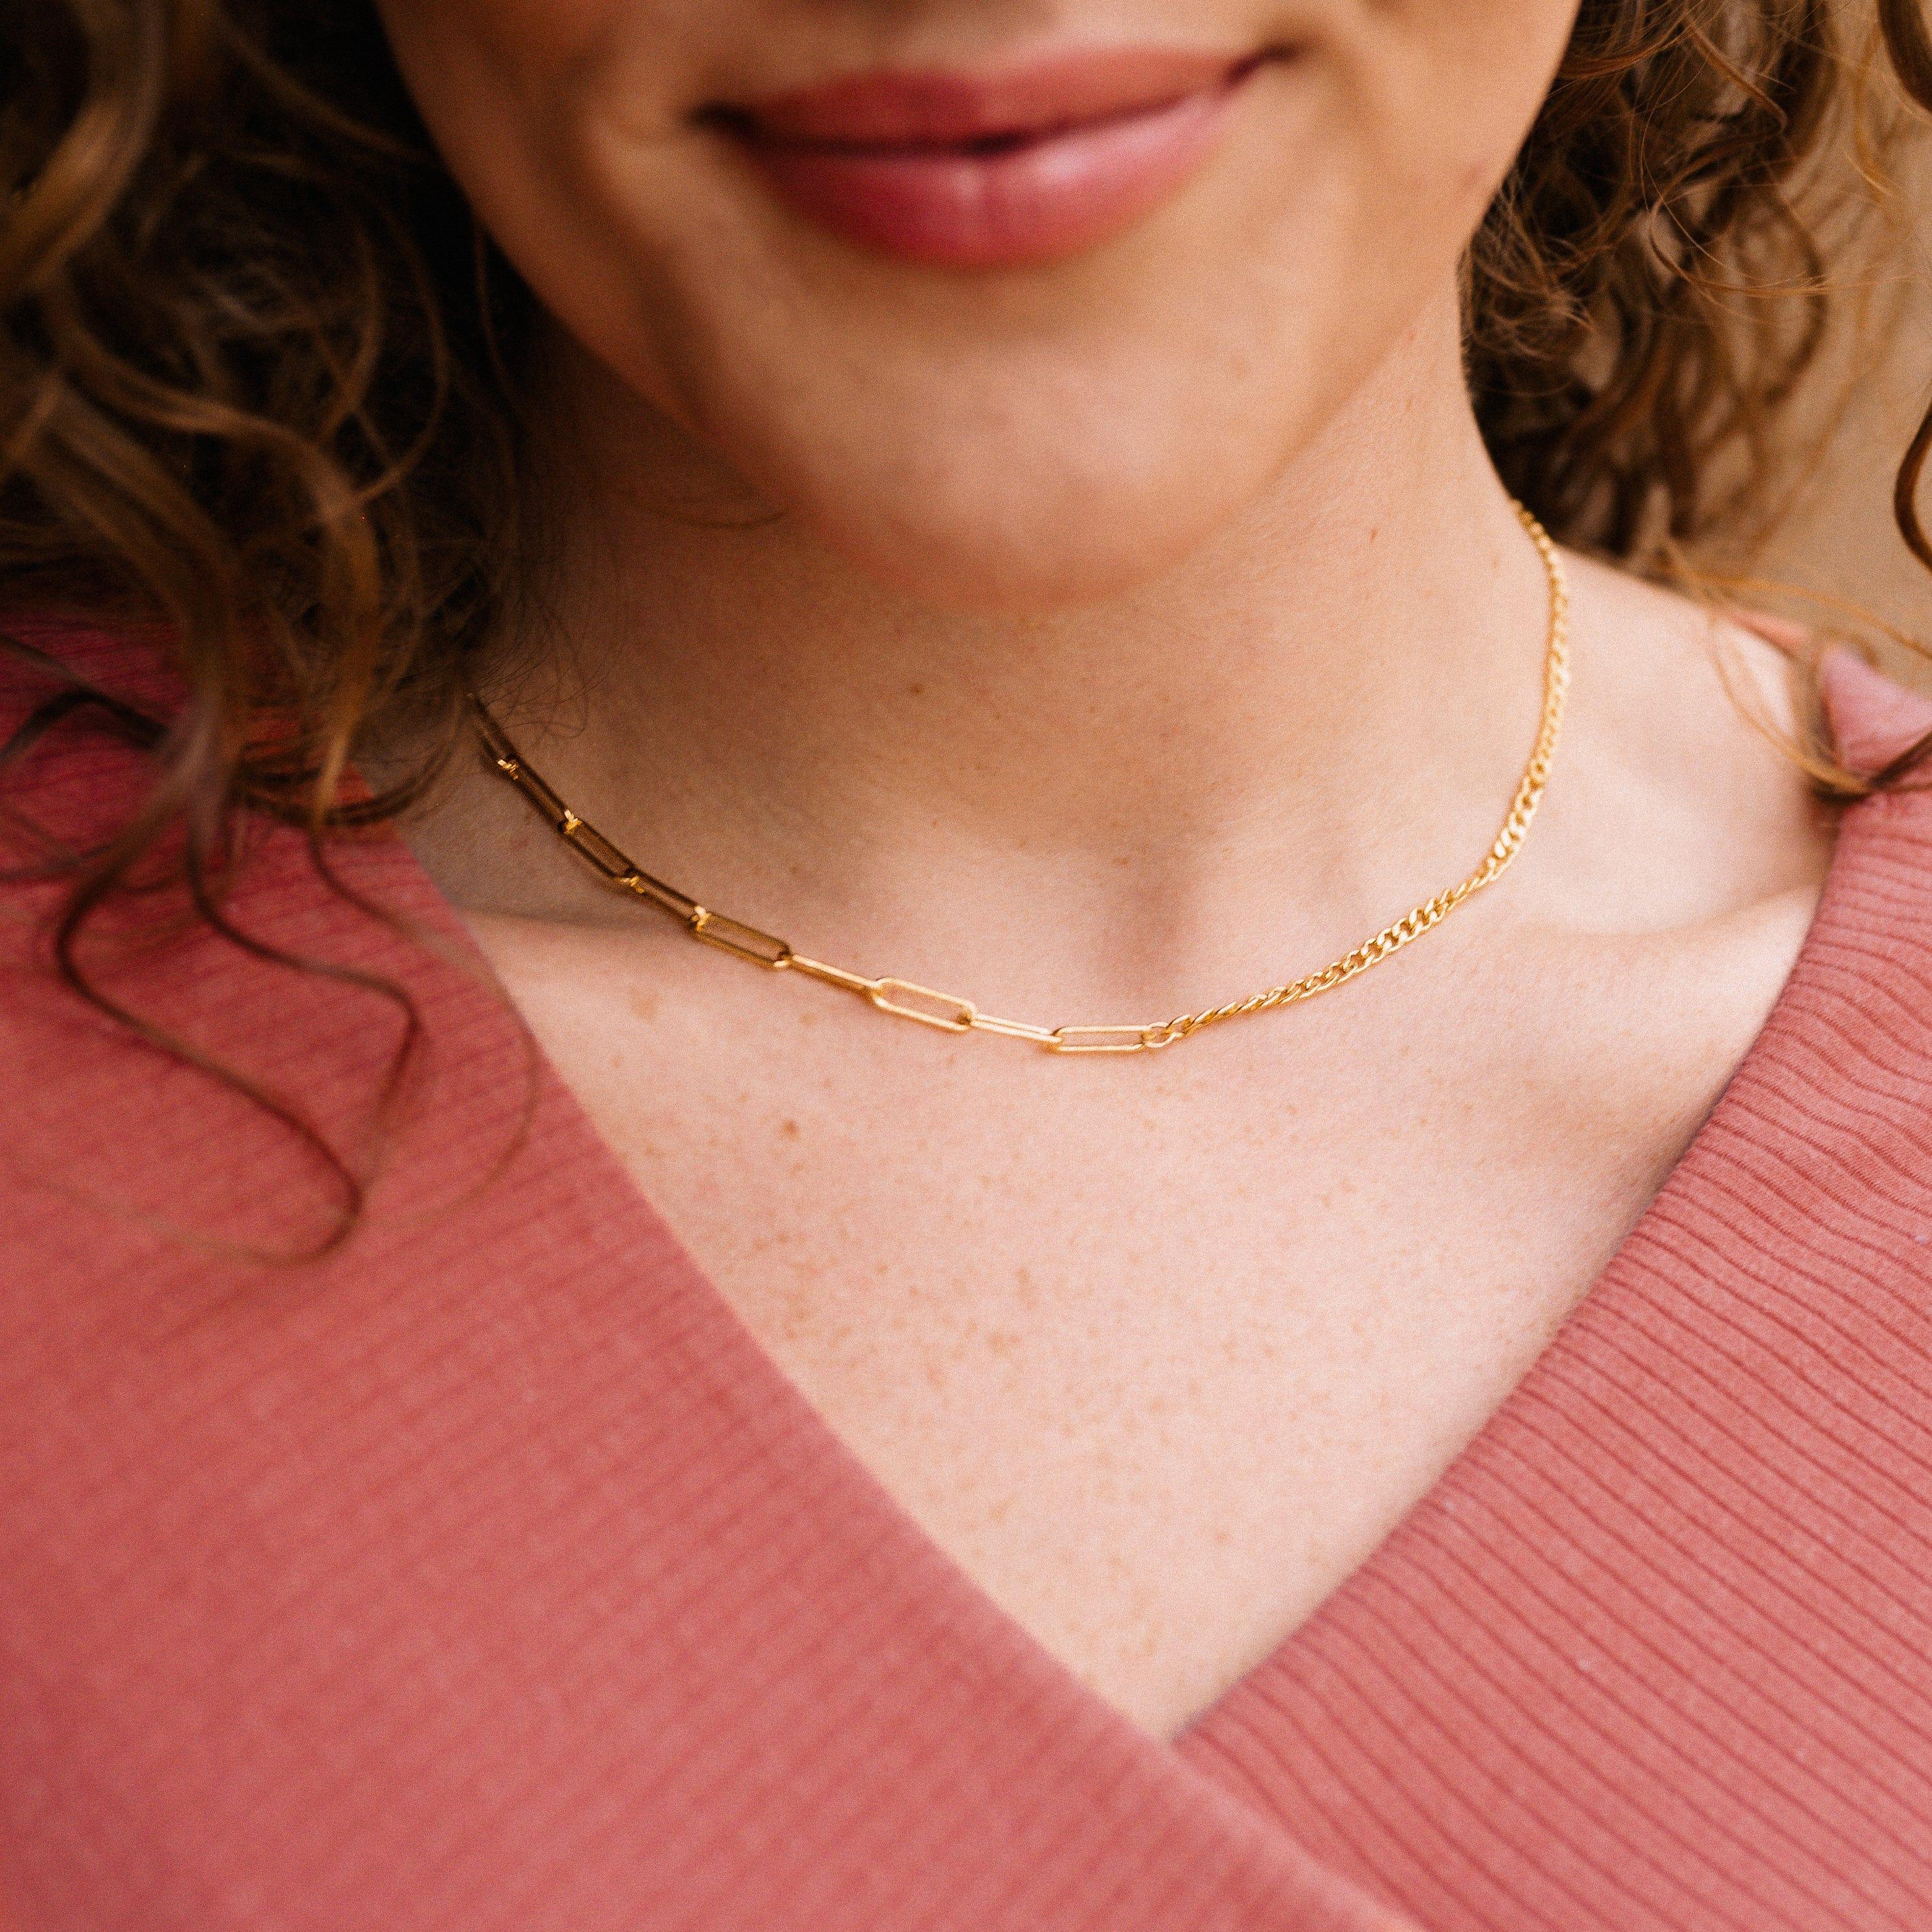 Kin Chain Necklace - Nolia Jewelry - Meaningful + Sustainably Handcrafted Jewelry